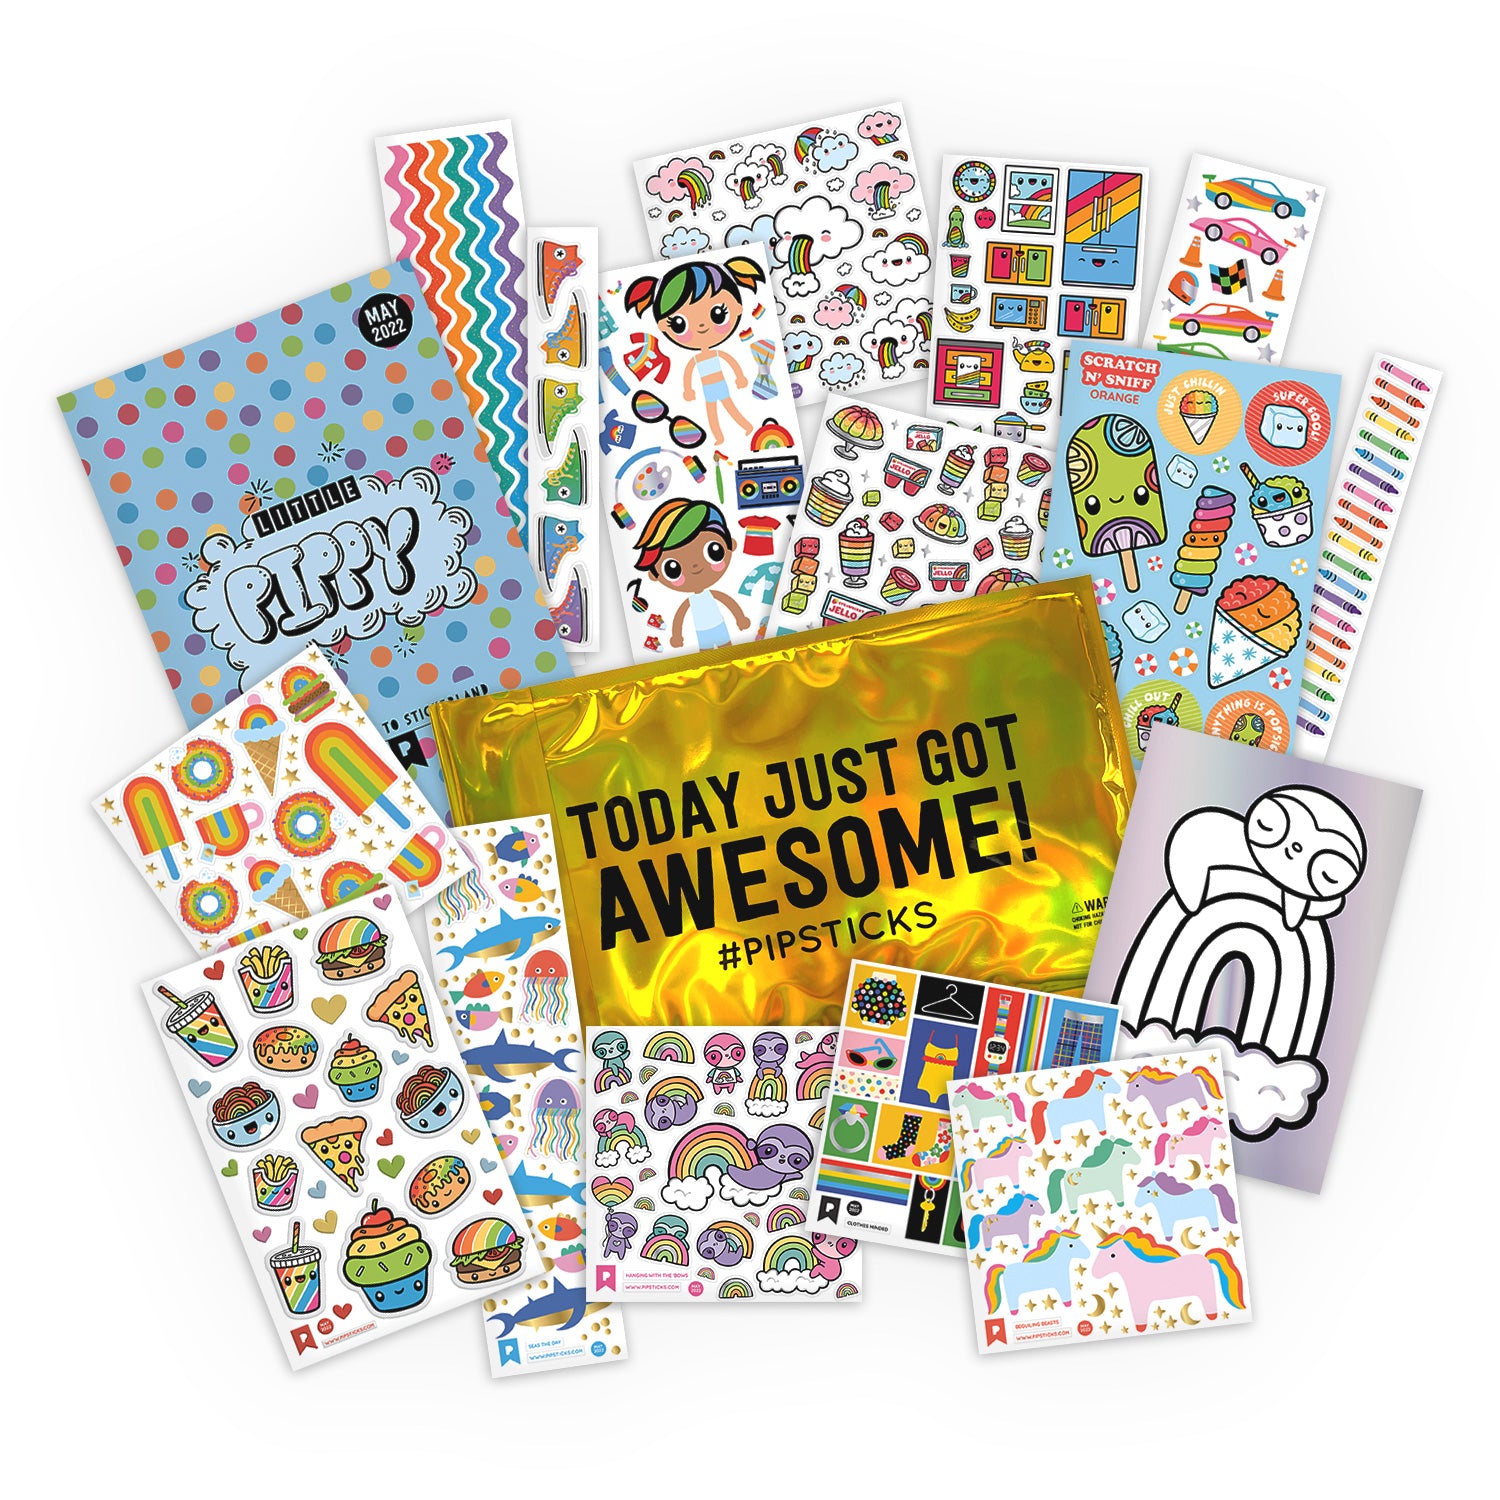 Kids Love Stickers - Sticker Subscription for Kids